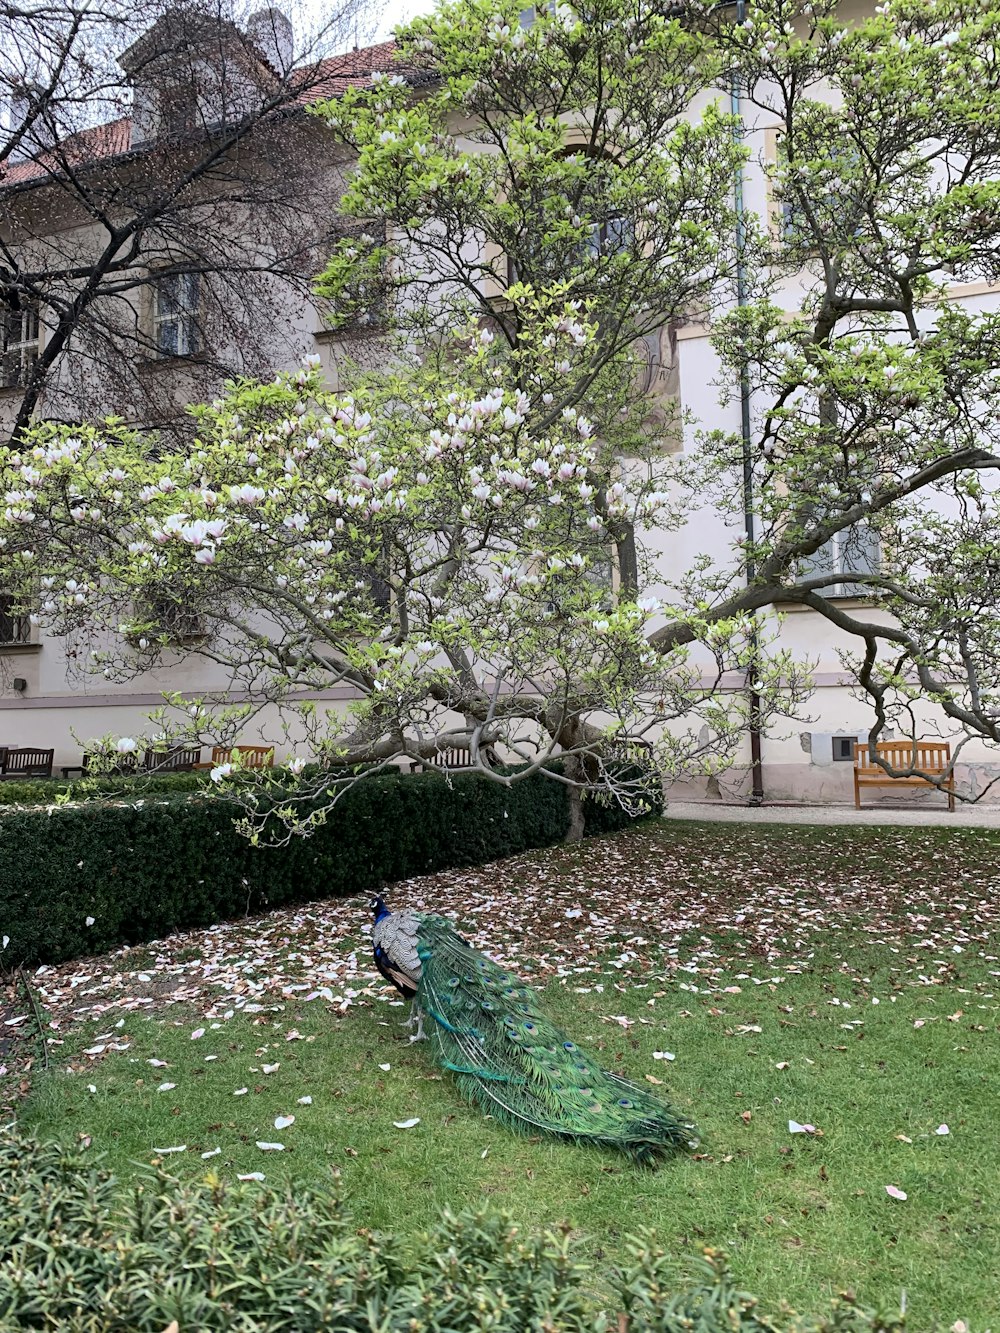 a peacock is sitting in the grass near a tree